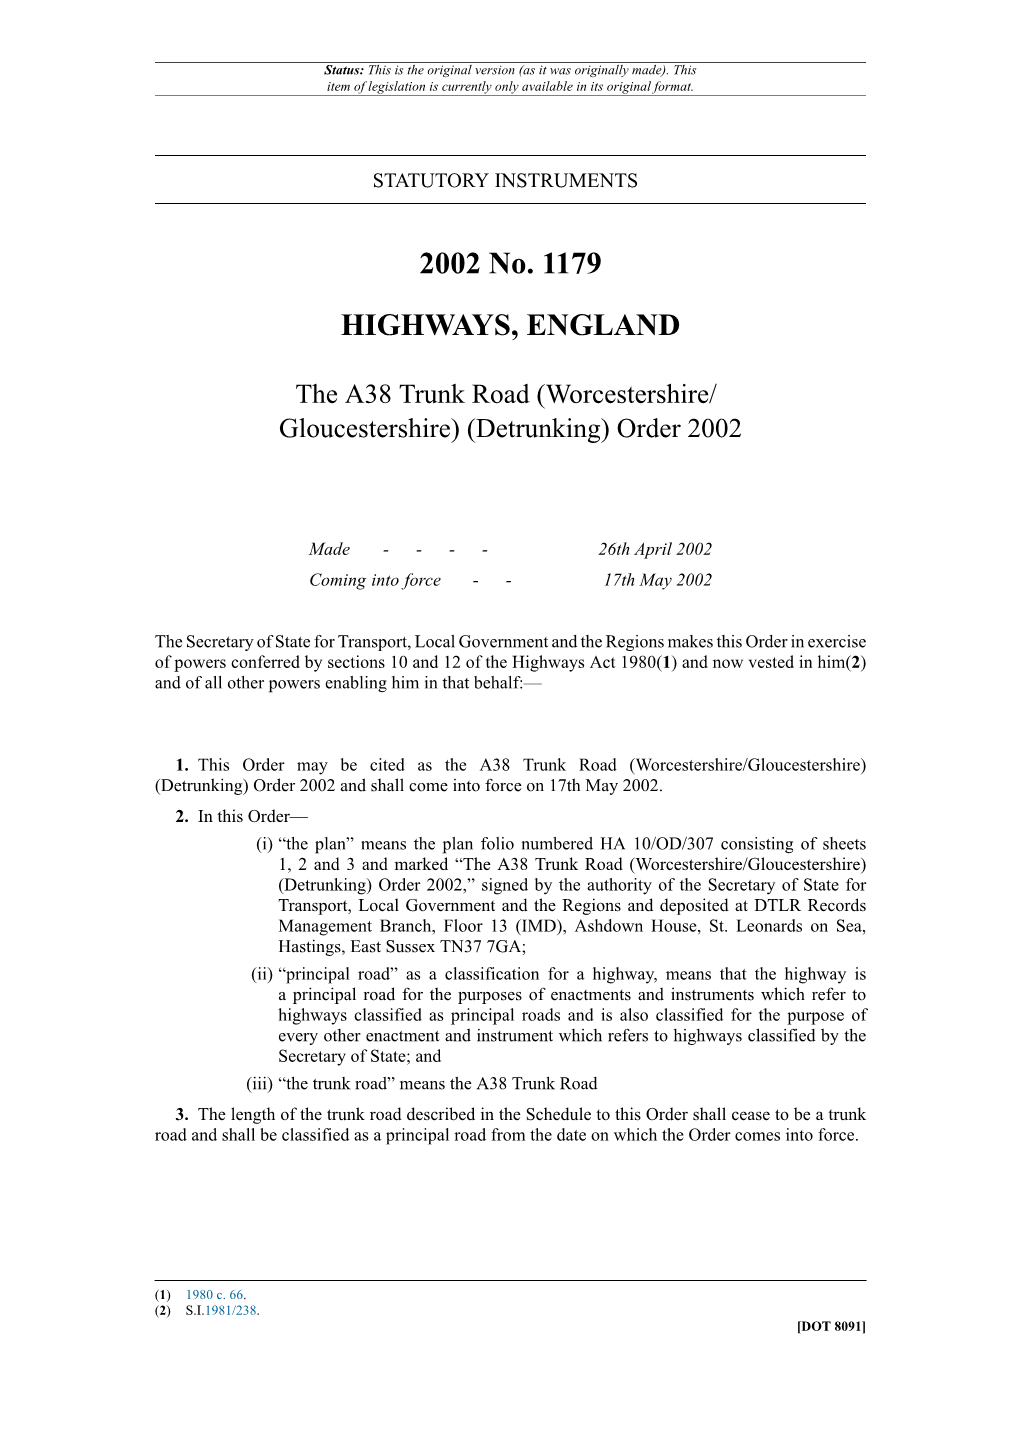 The A38 Trunk Road (Worcestershire/Gloucestershire) (Detrunking) Order 2002 and Shall Come Into Force on 17Th May 2002